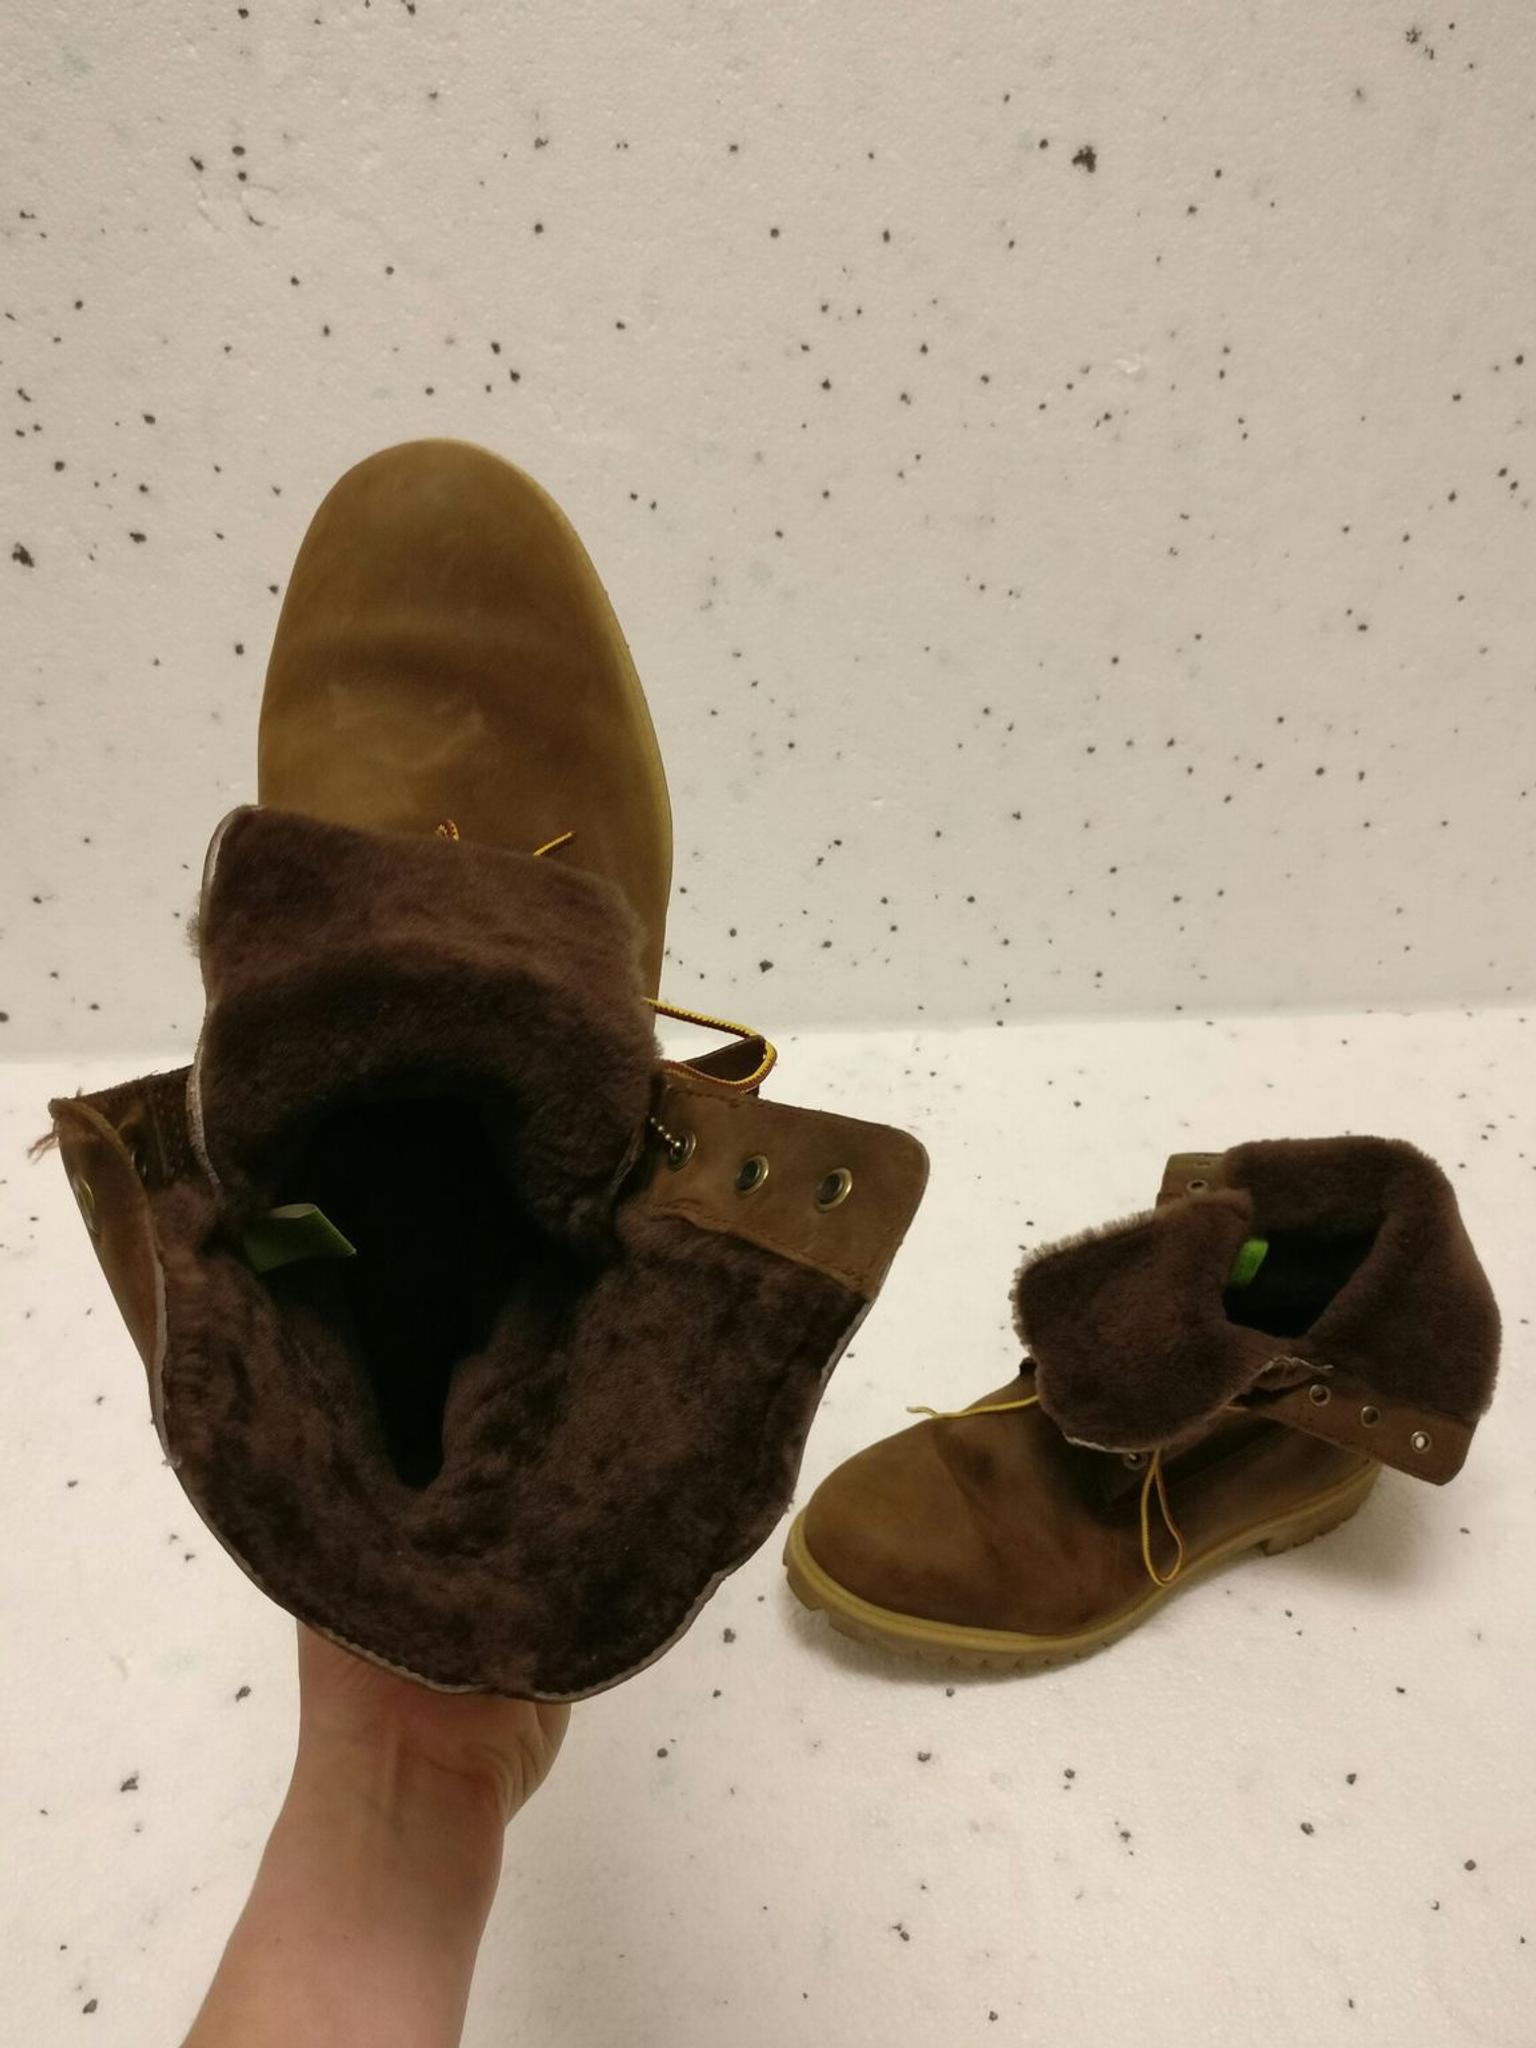 timberland boots with fur inside mens